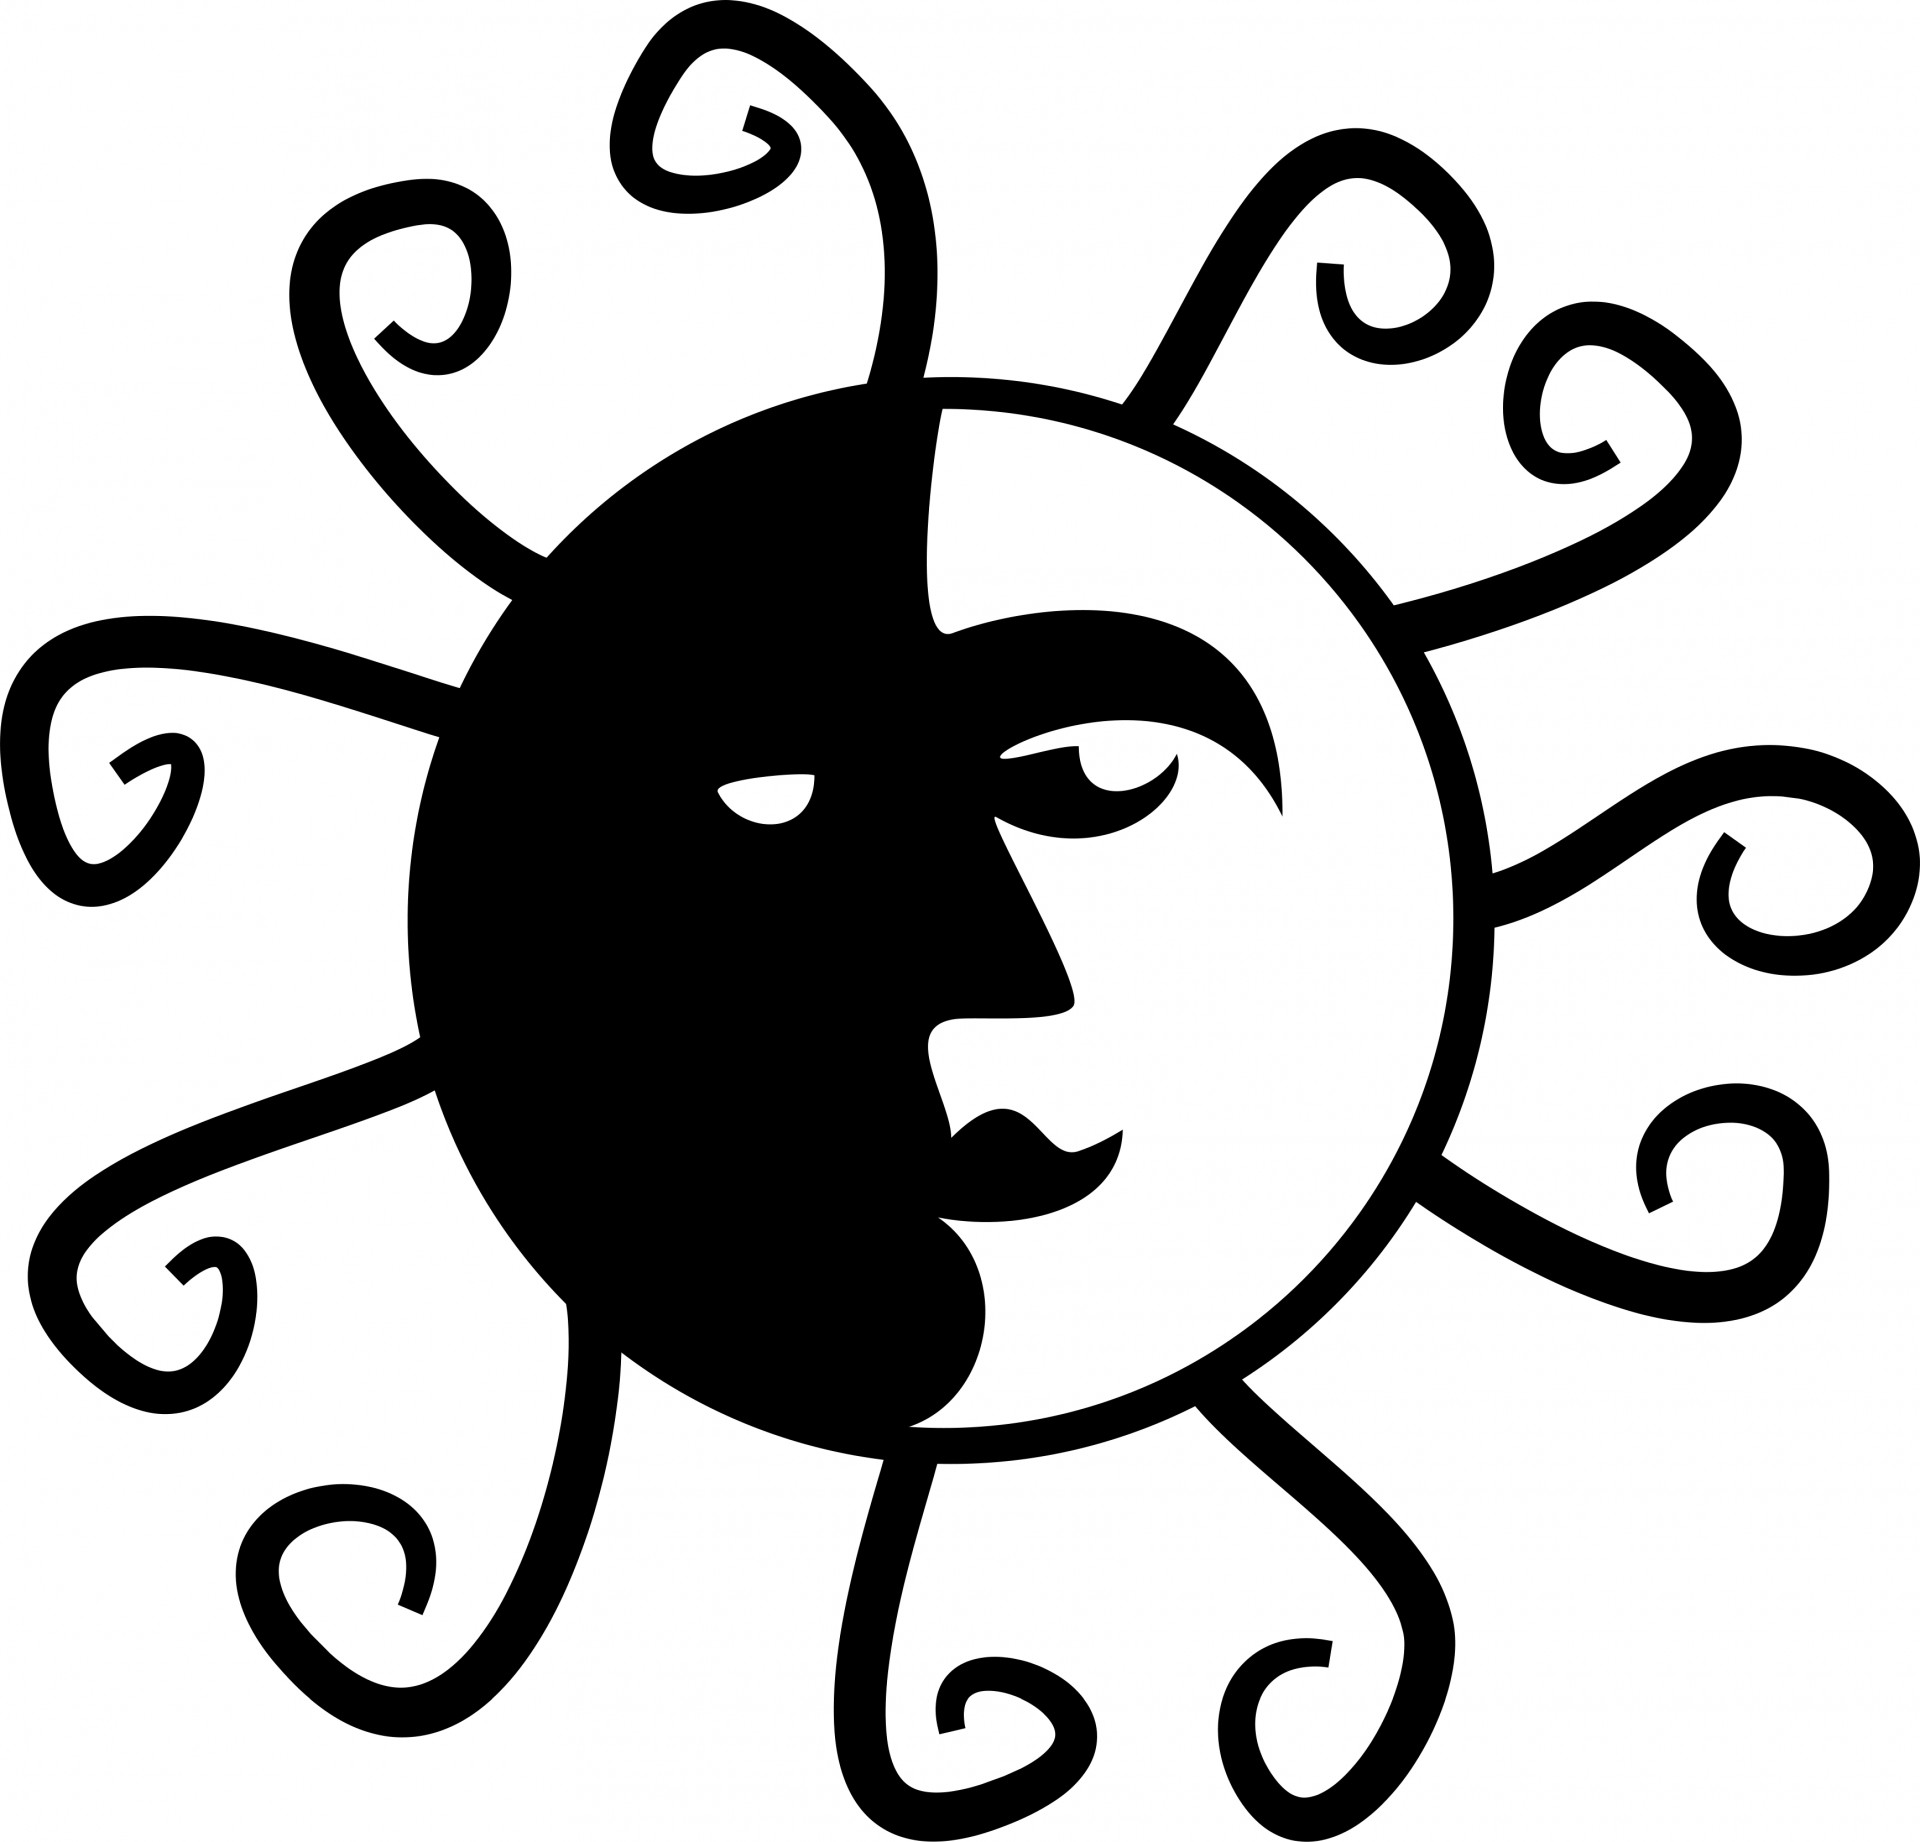 free black and white clipart of sun - photo #24